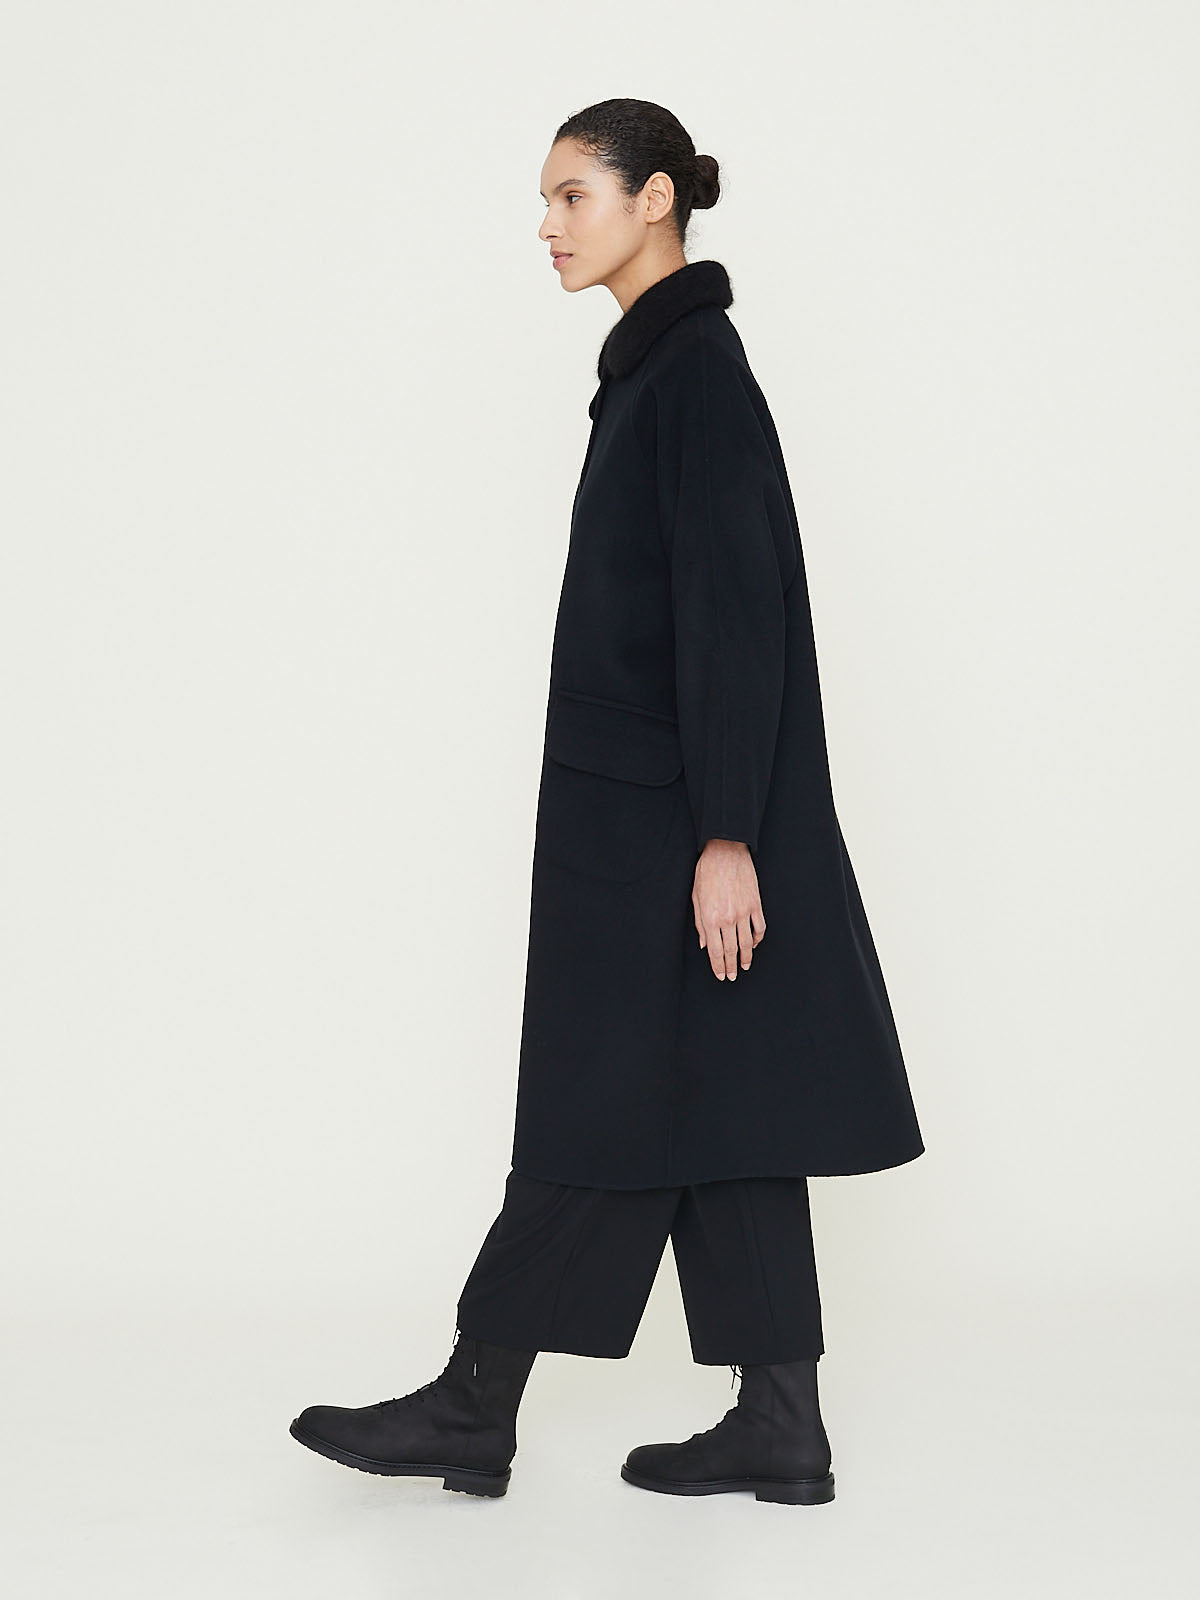 Arts & Science - Attached Collar Coat in Black – Mouki Mou